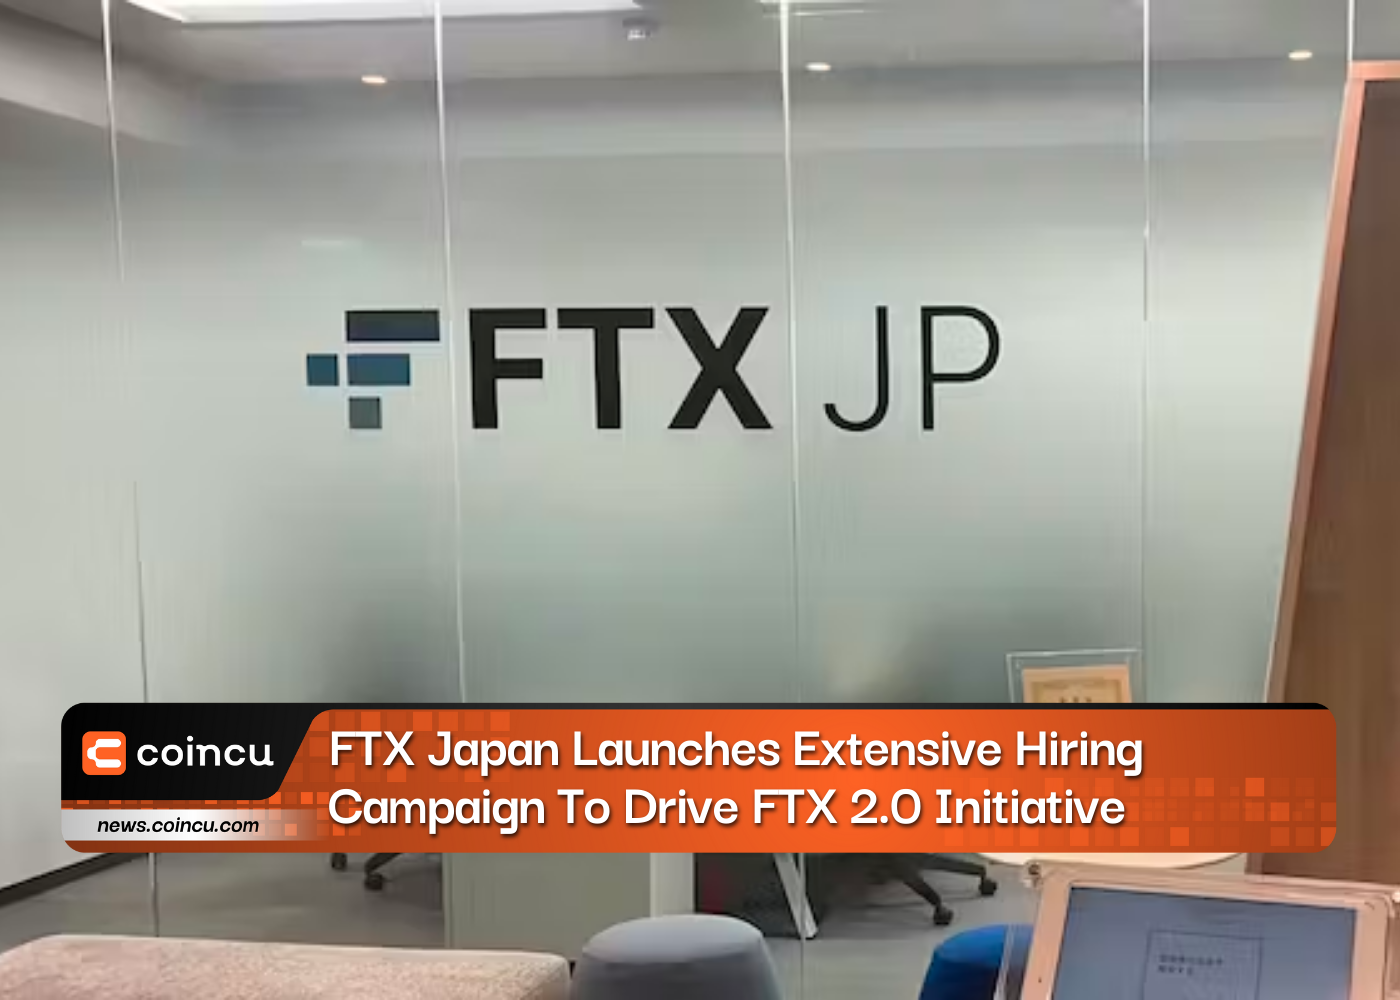 FTX Japan Launches Extensive Hiring Campaign To Drive FTX 2.0 Initiative